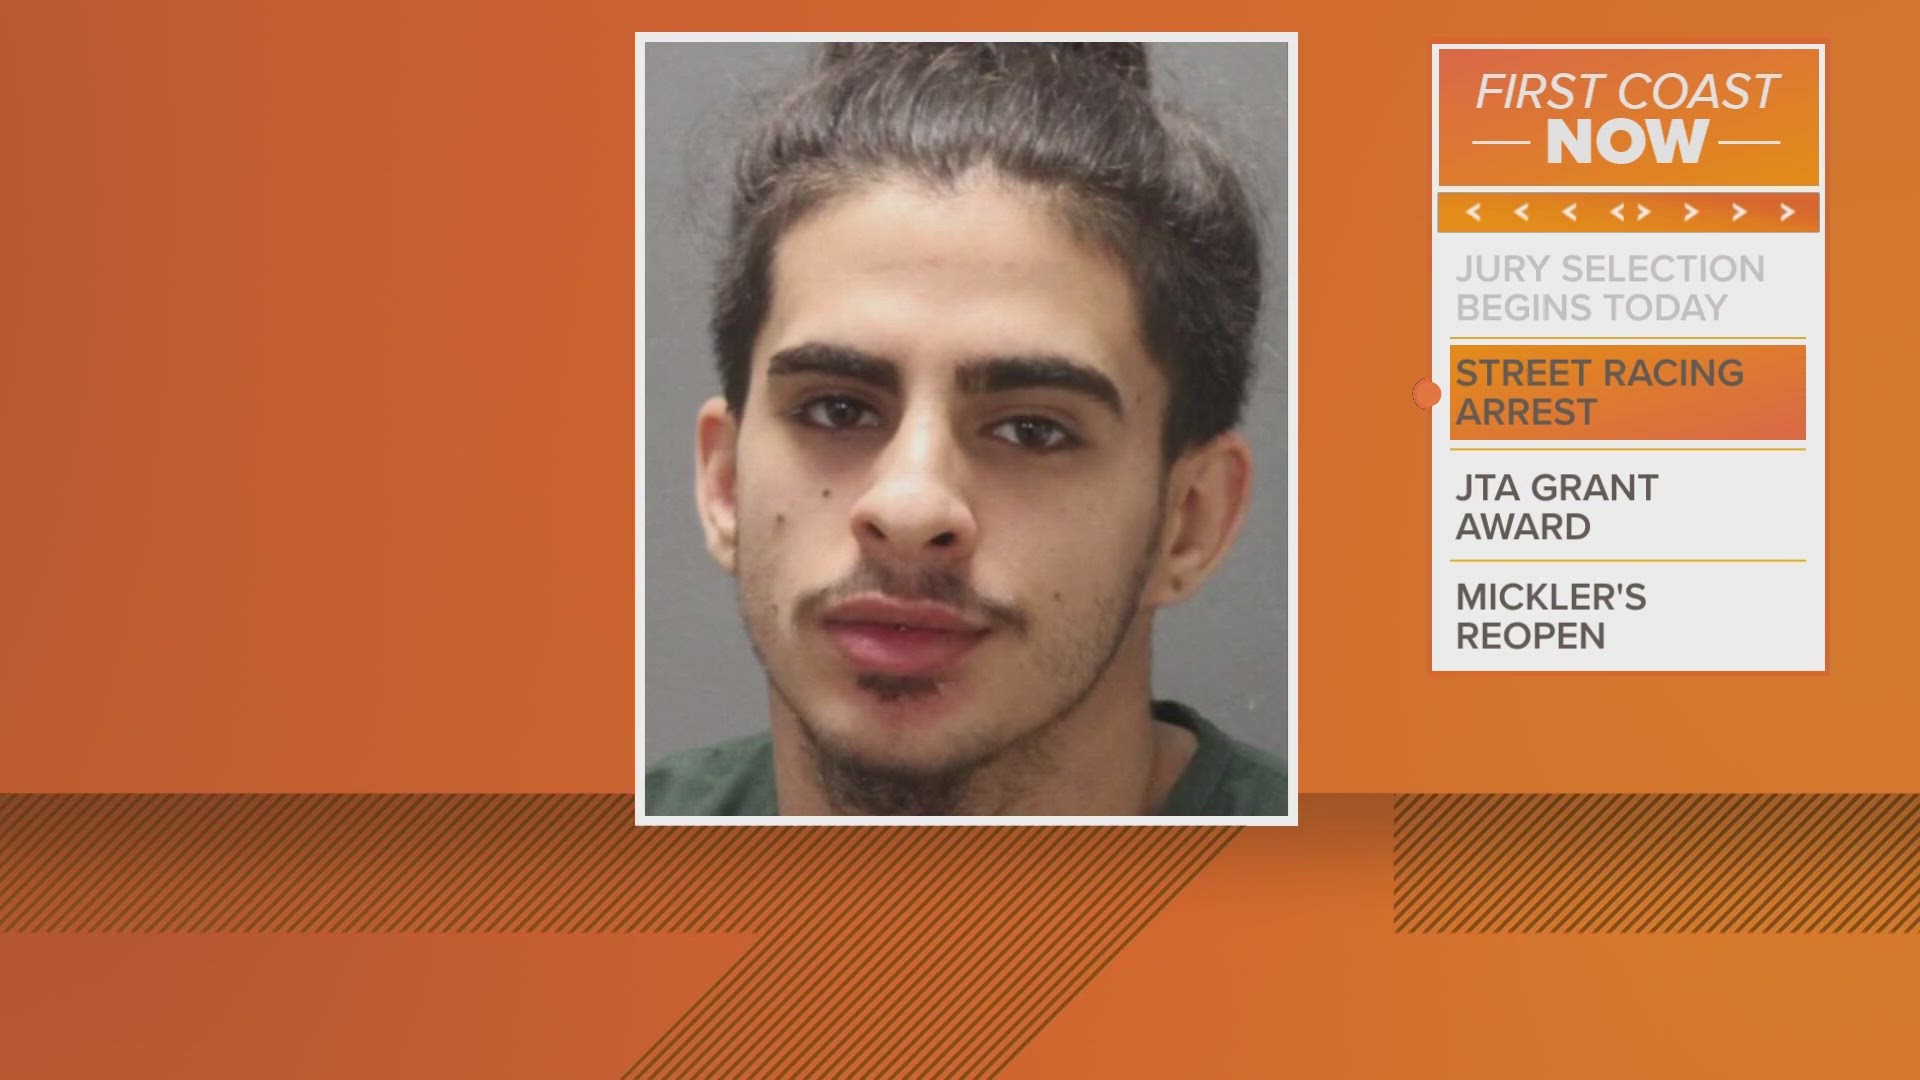 Husam Alwazani, 21, was also arrested on charges of street racing, reckless driving, possessing marijuana, and driving without a valid driver's license, police say.